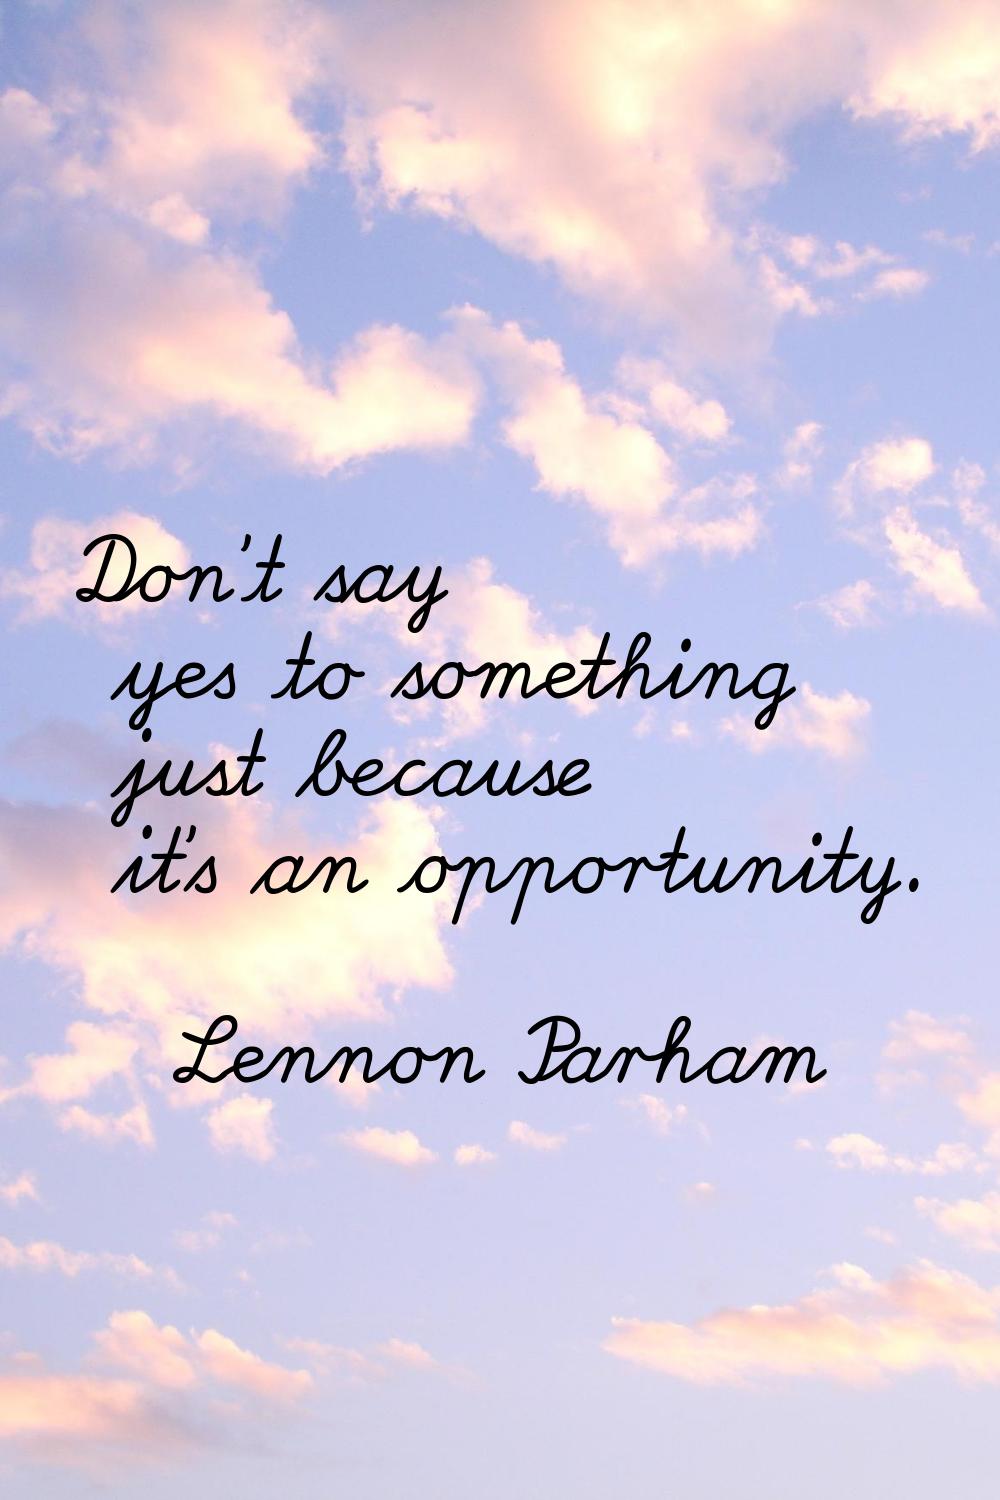 Don't say yes to something just because it's an opportunity.